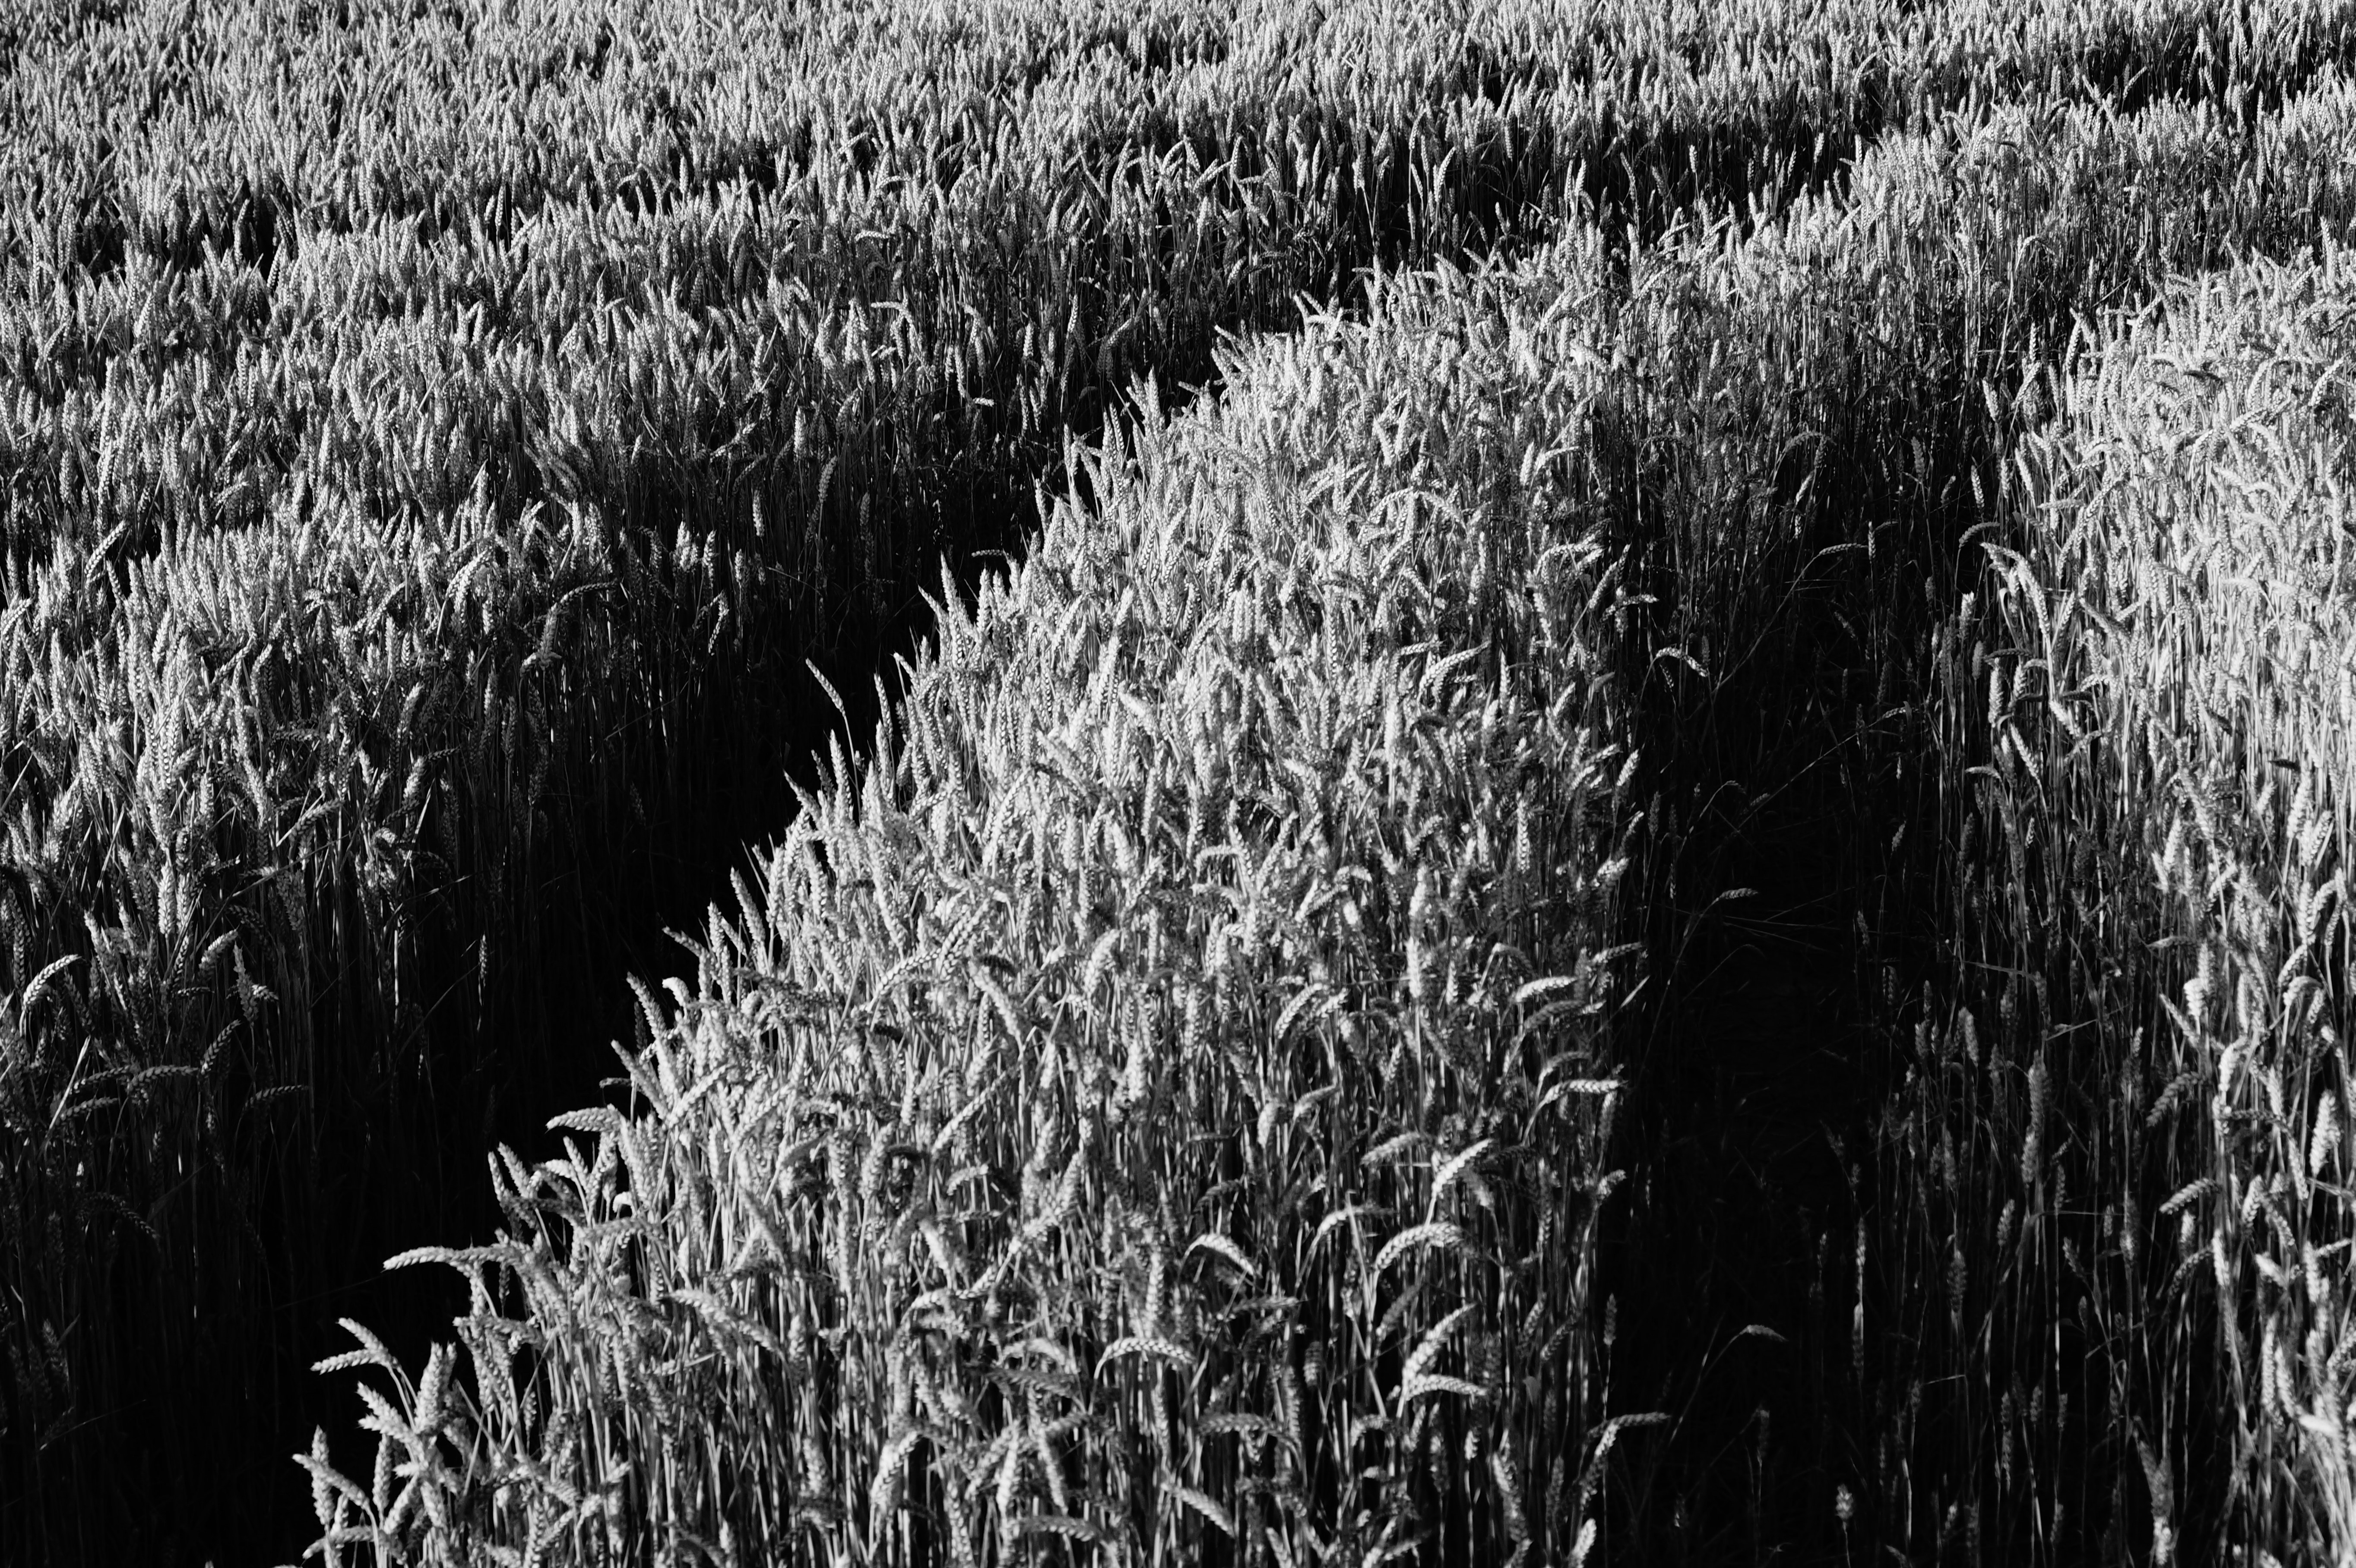 Grayscale corn fields during daytime photo